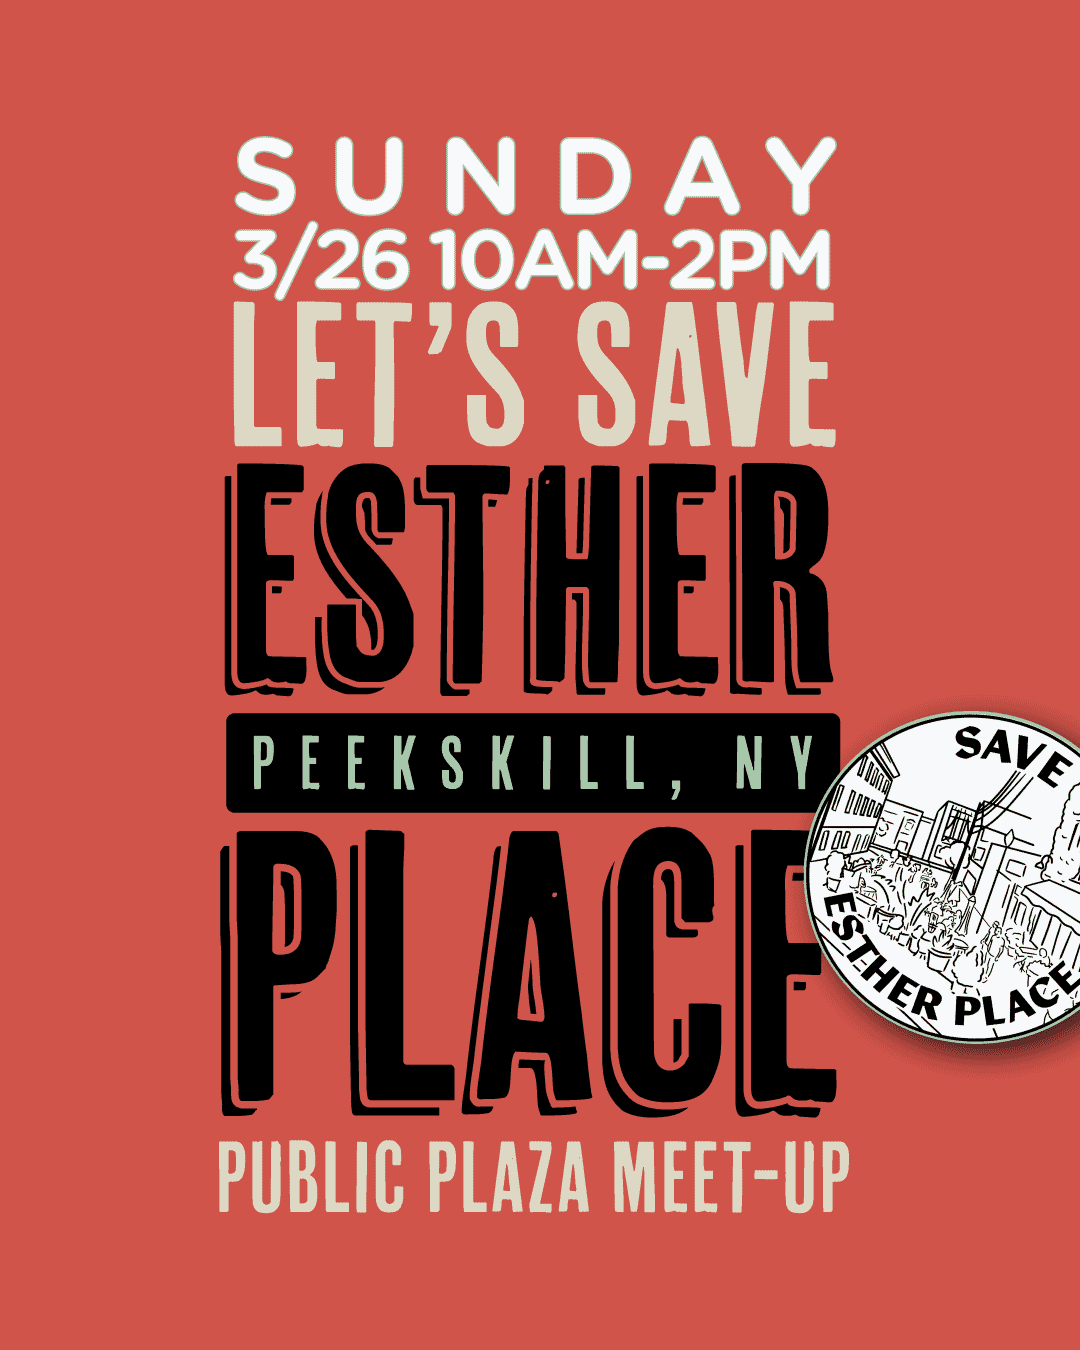 Flyer for Save Esther Place Gathering on Sunday, 3/26 10am-2pm